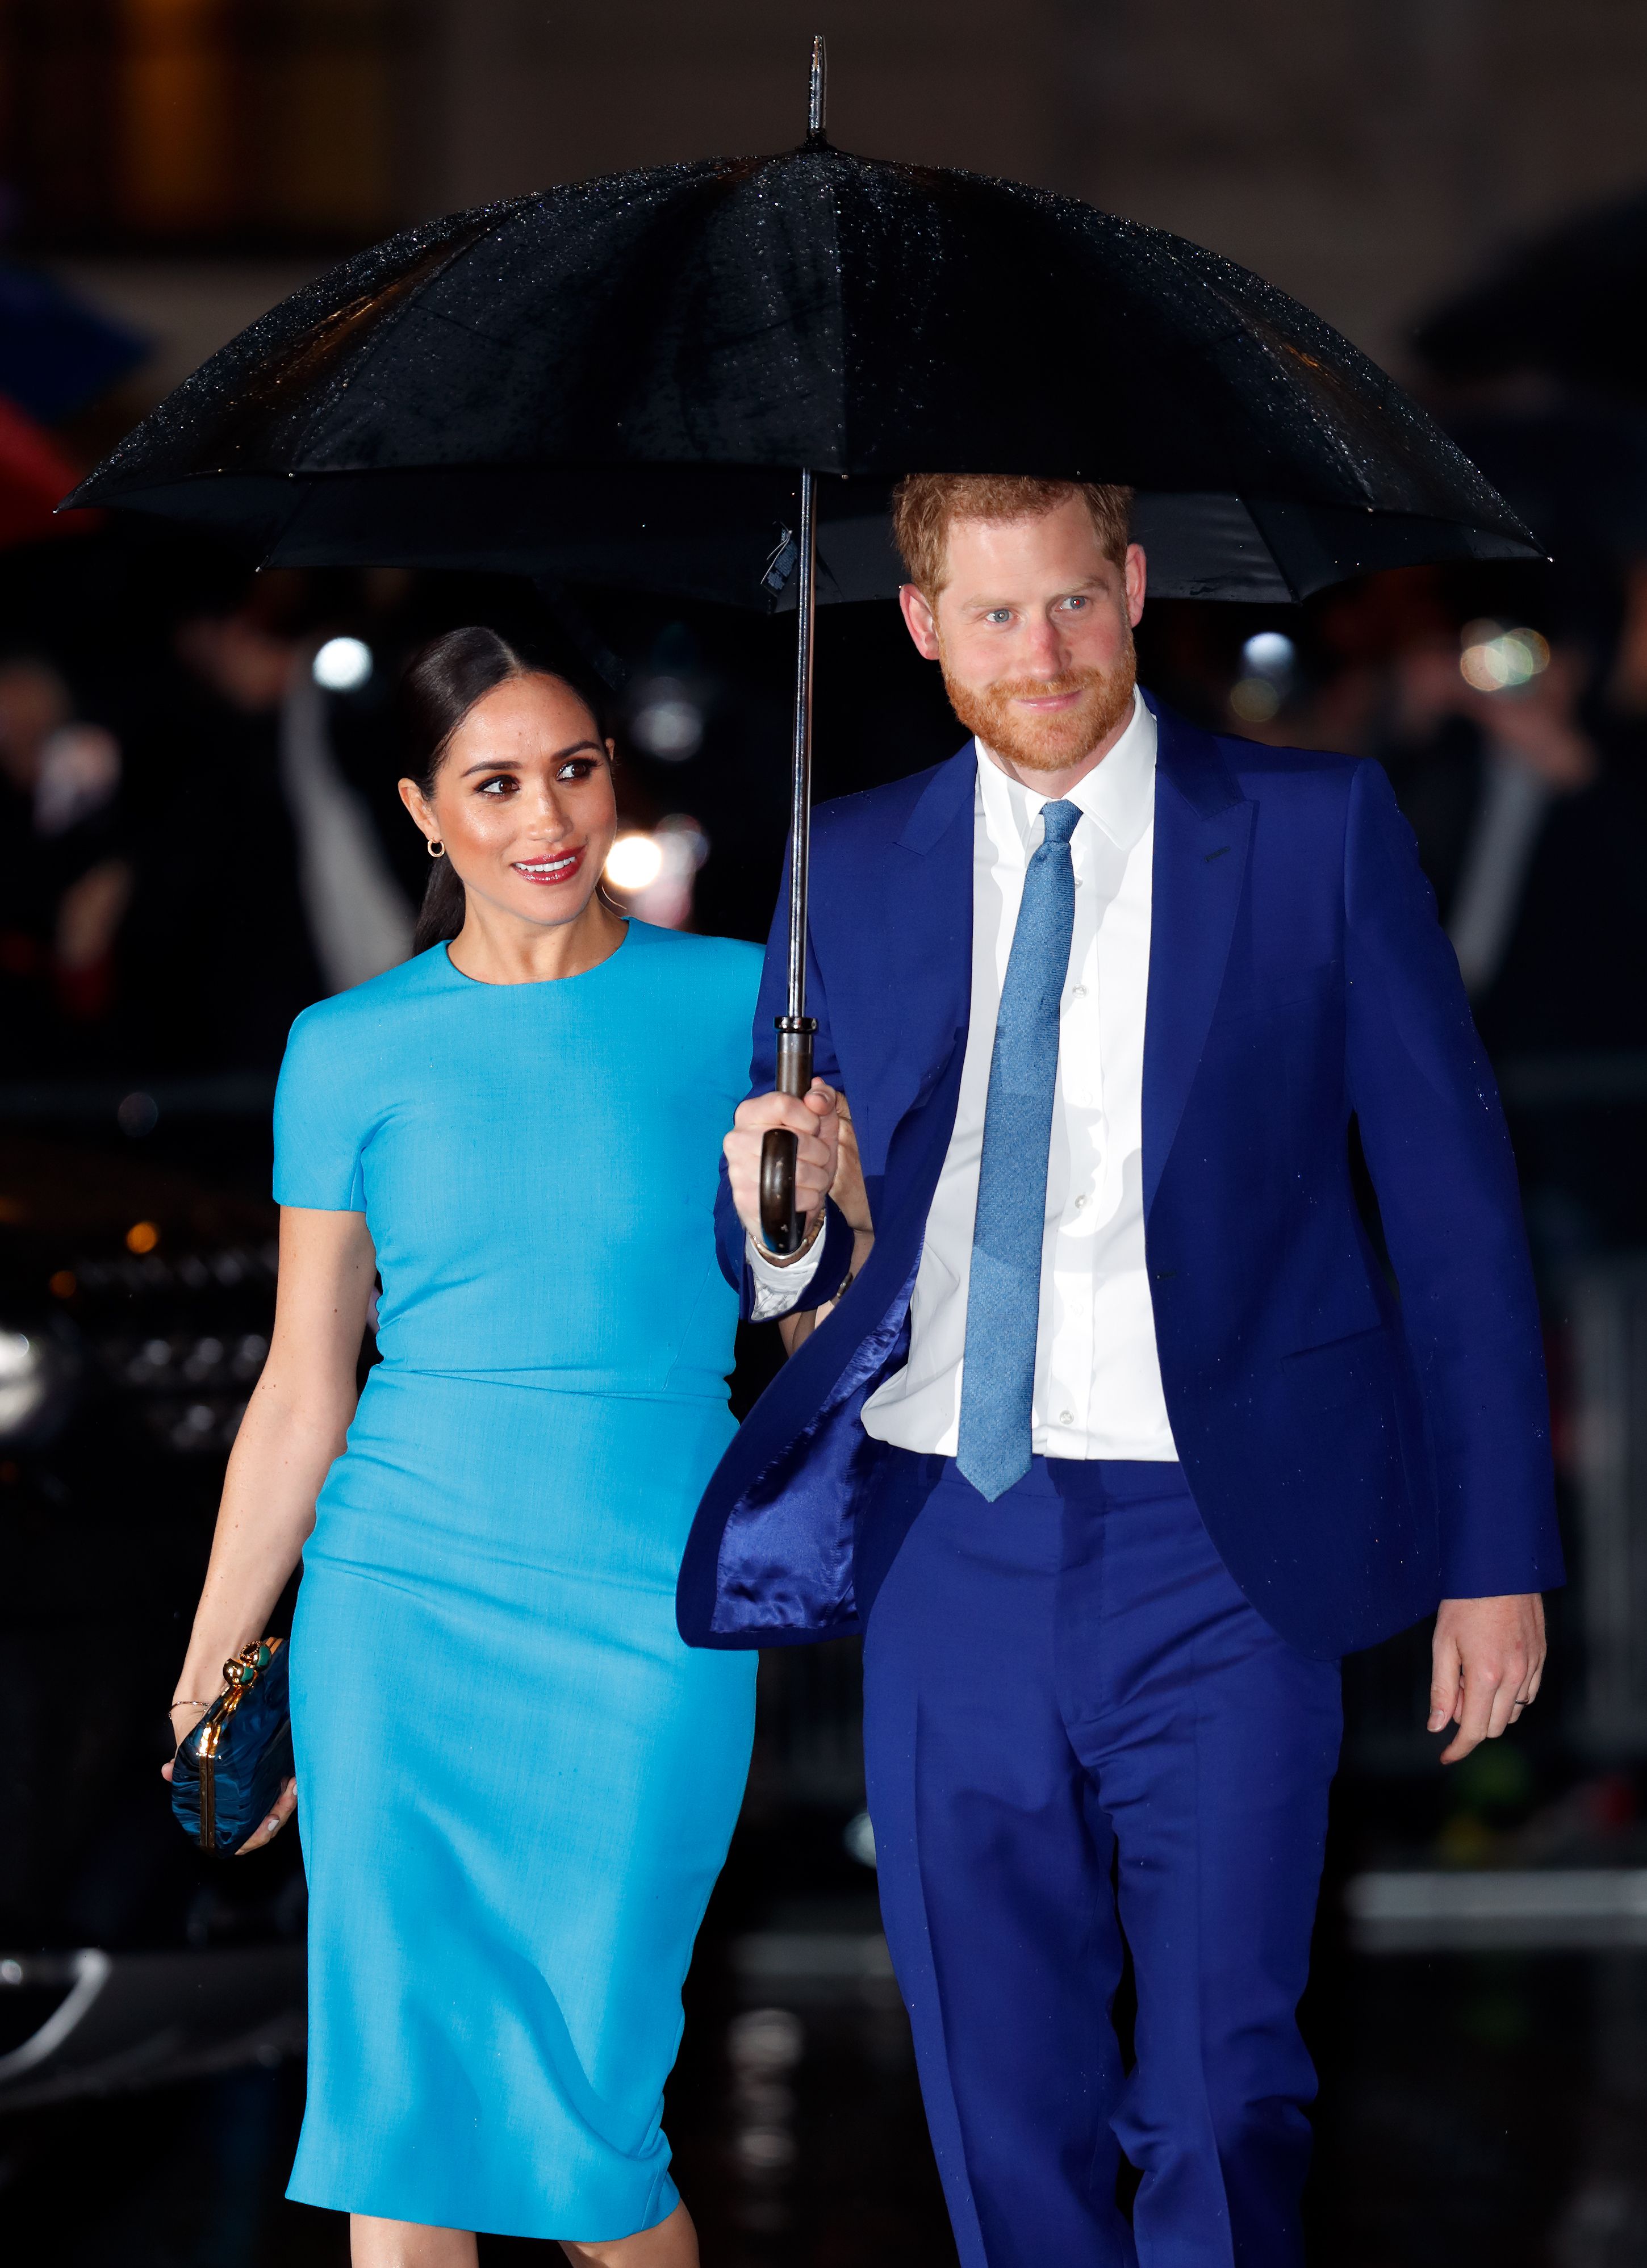 Meghan Markle and Prince Harry at the Endeavour Fund Awards at Mansion House on March 5, 2020 | Photo: Getty Images